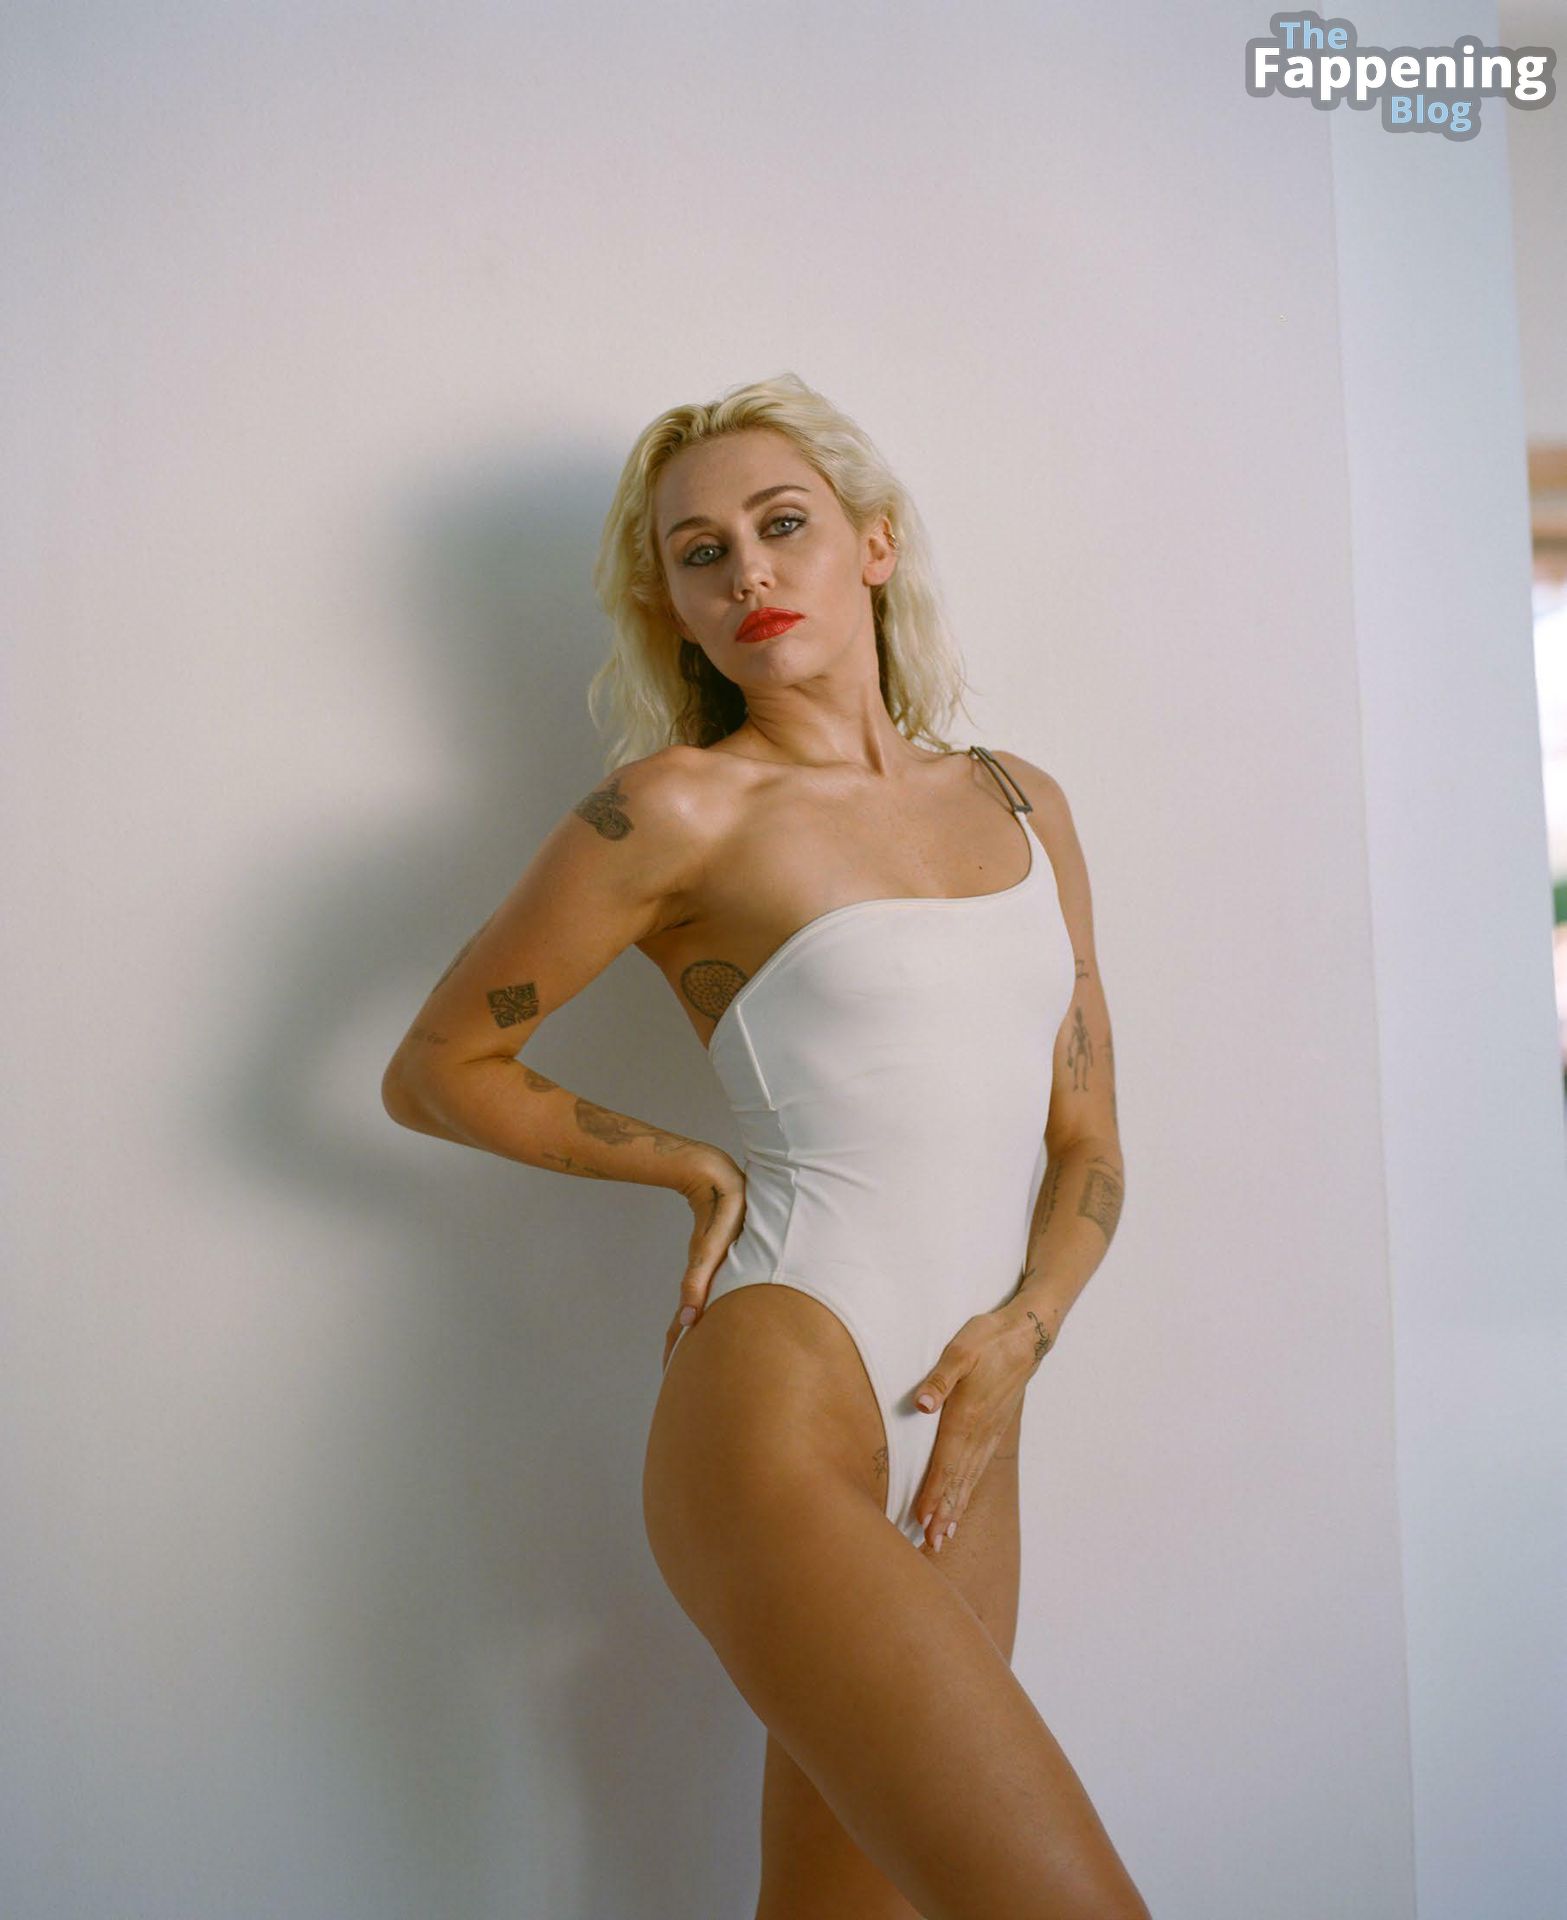 Miley-Cyrus-Nude-Sexy-94-The-Fappening-Blog.jpg